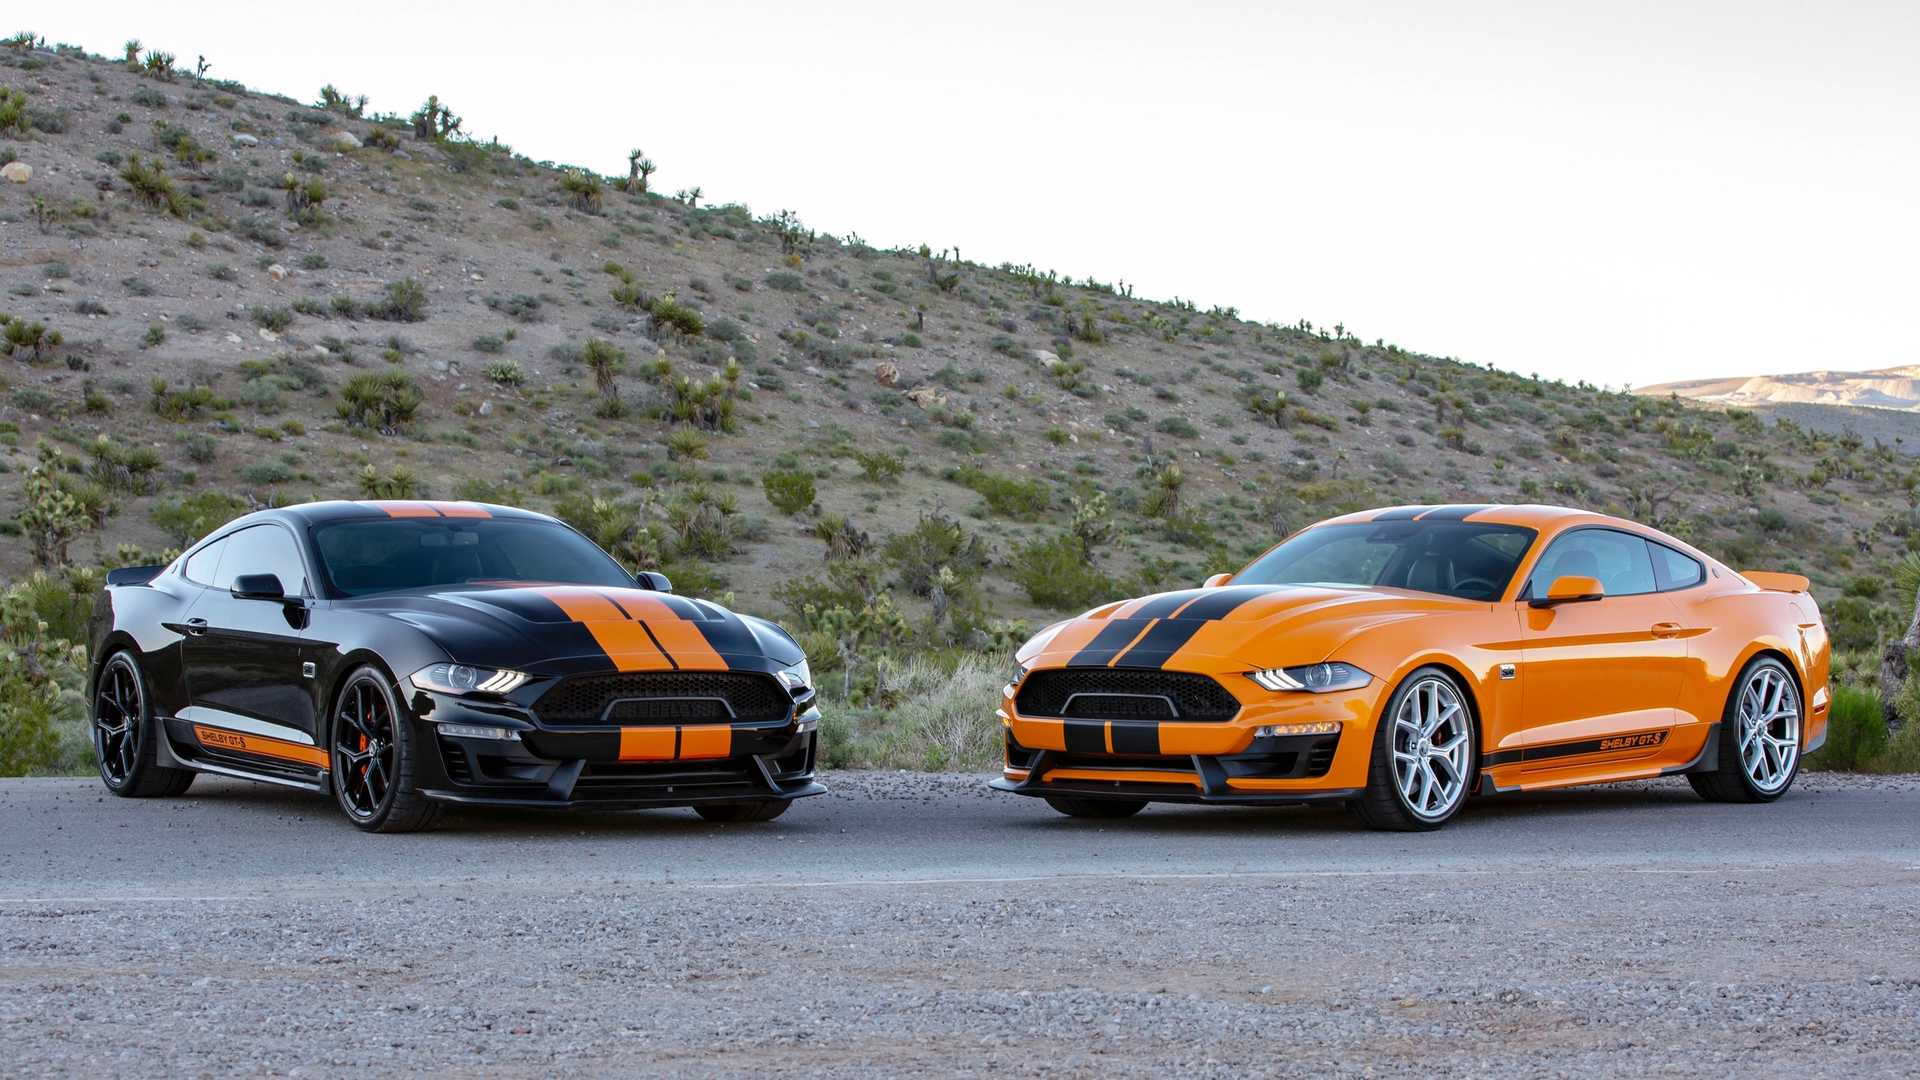 Sixt Ford Shelby Mustang GT-S rental car special edition